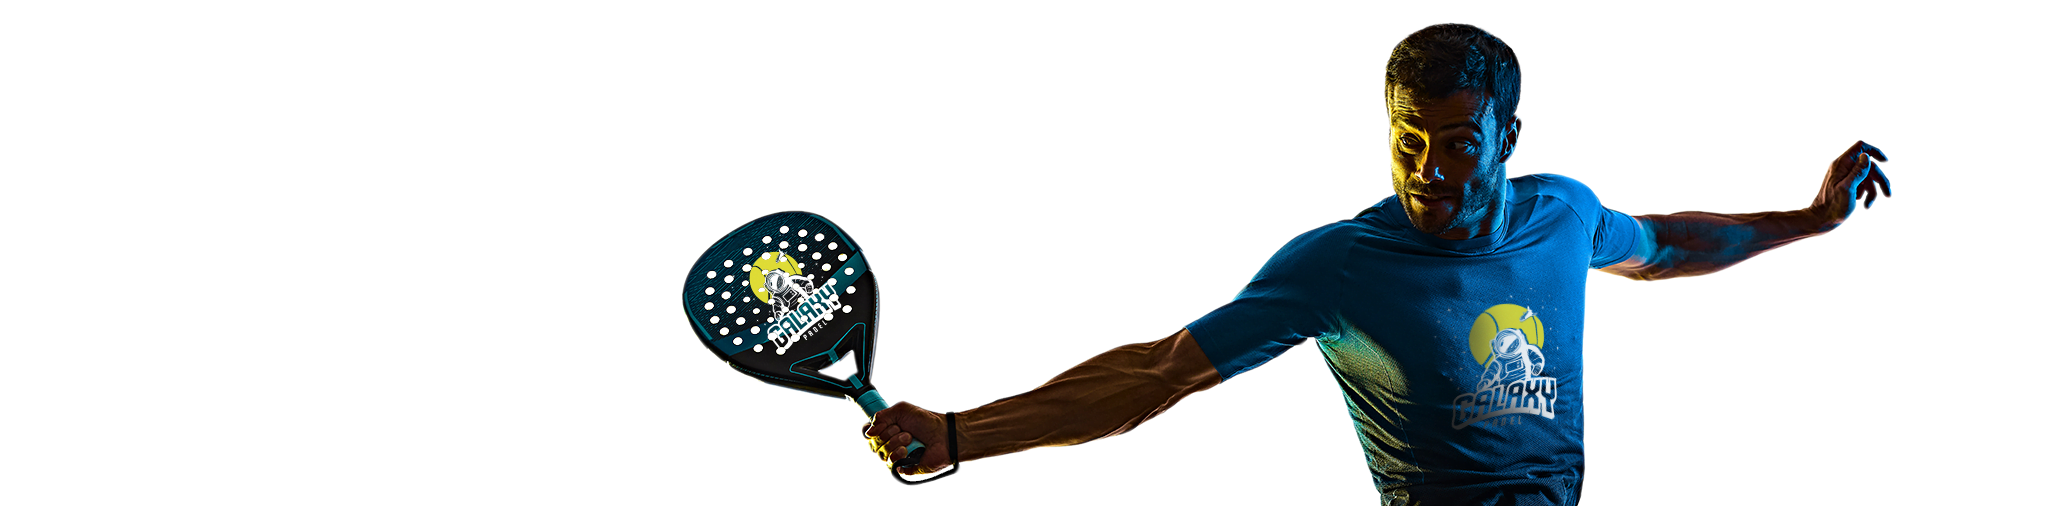 https://galaxypadel.it/wp-content/uploads/2021/11/INostriCorsi_Footer.png